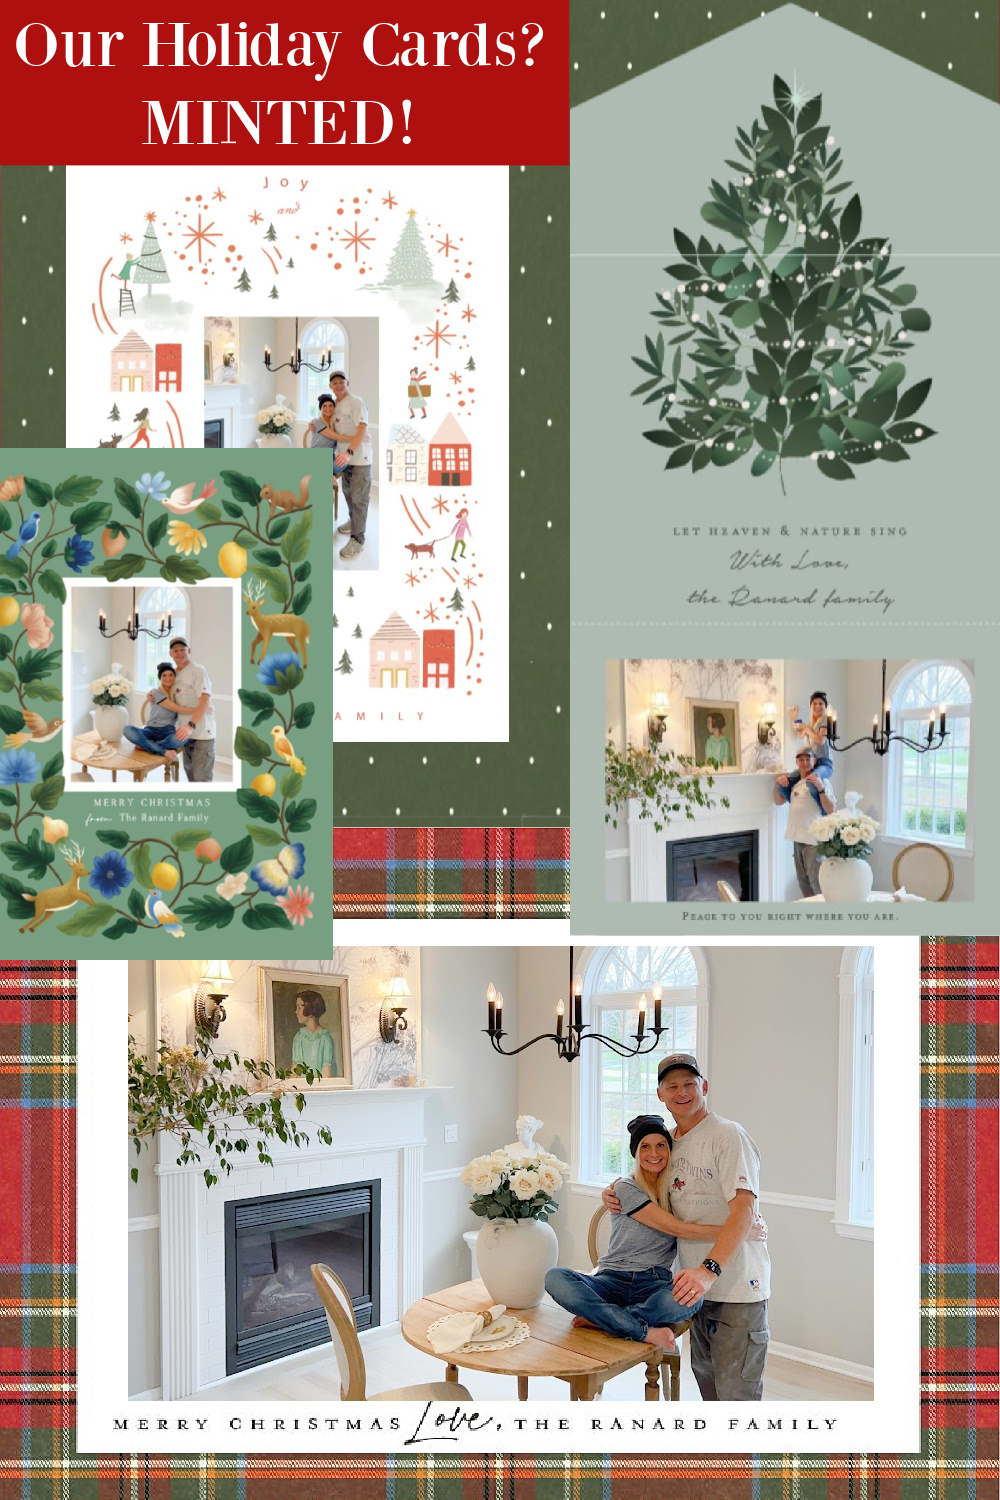 A Minted holiday card is easier than ever to customize and personalize! Come see a few options I am considering this year! #mintedholidaycard #holidaycards #customizedholidaycard